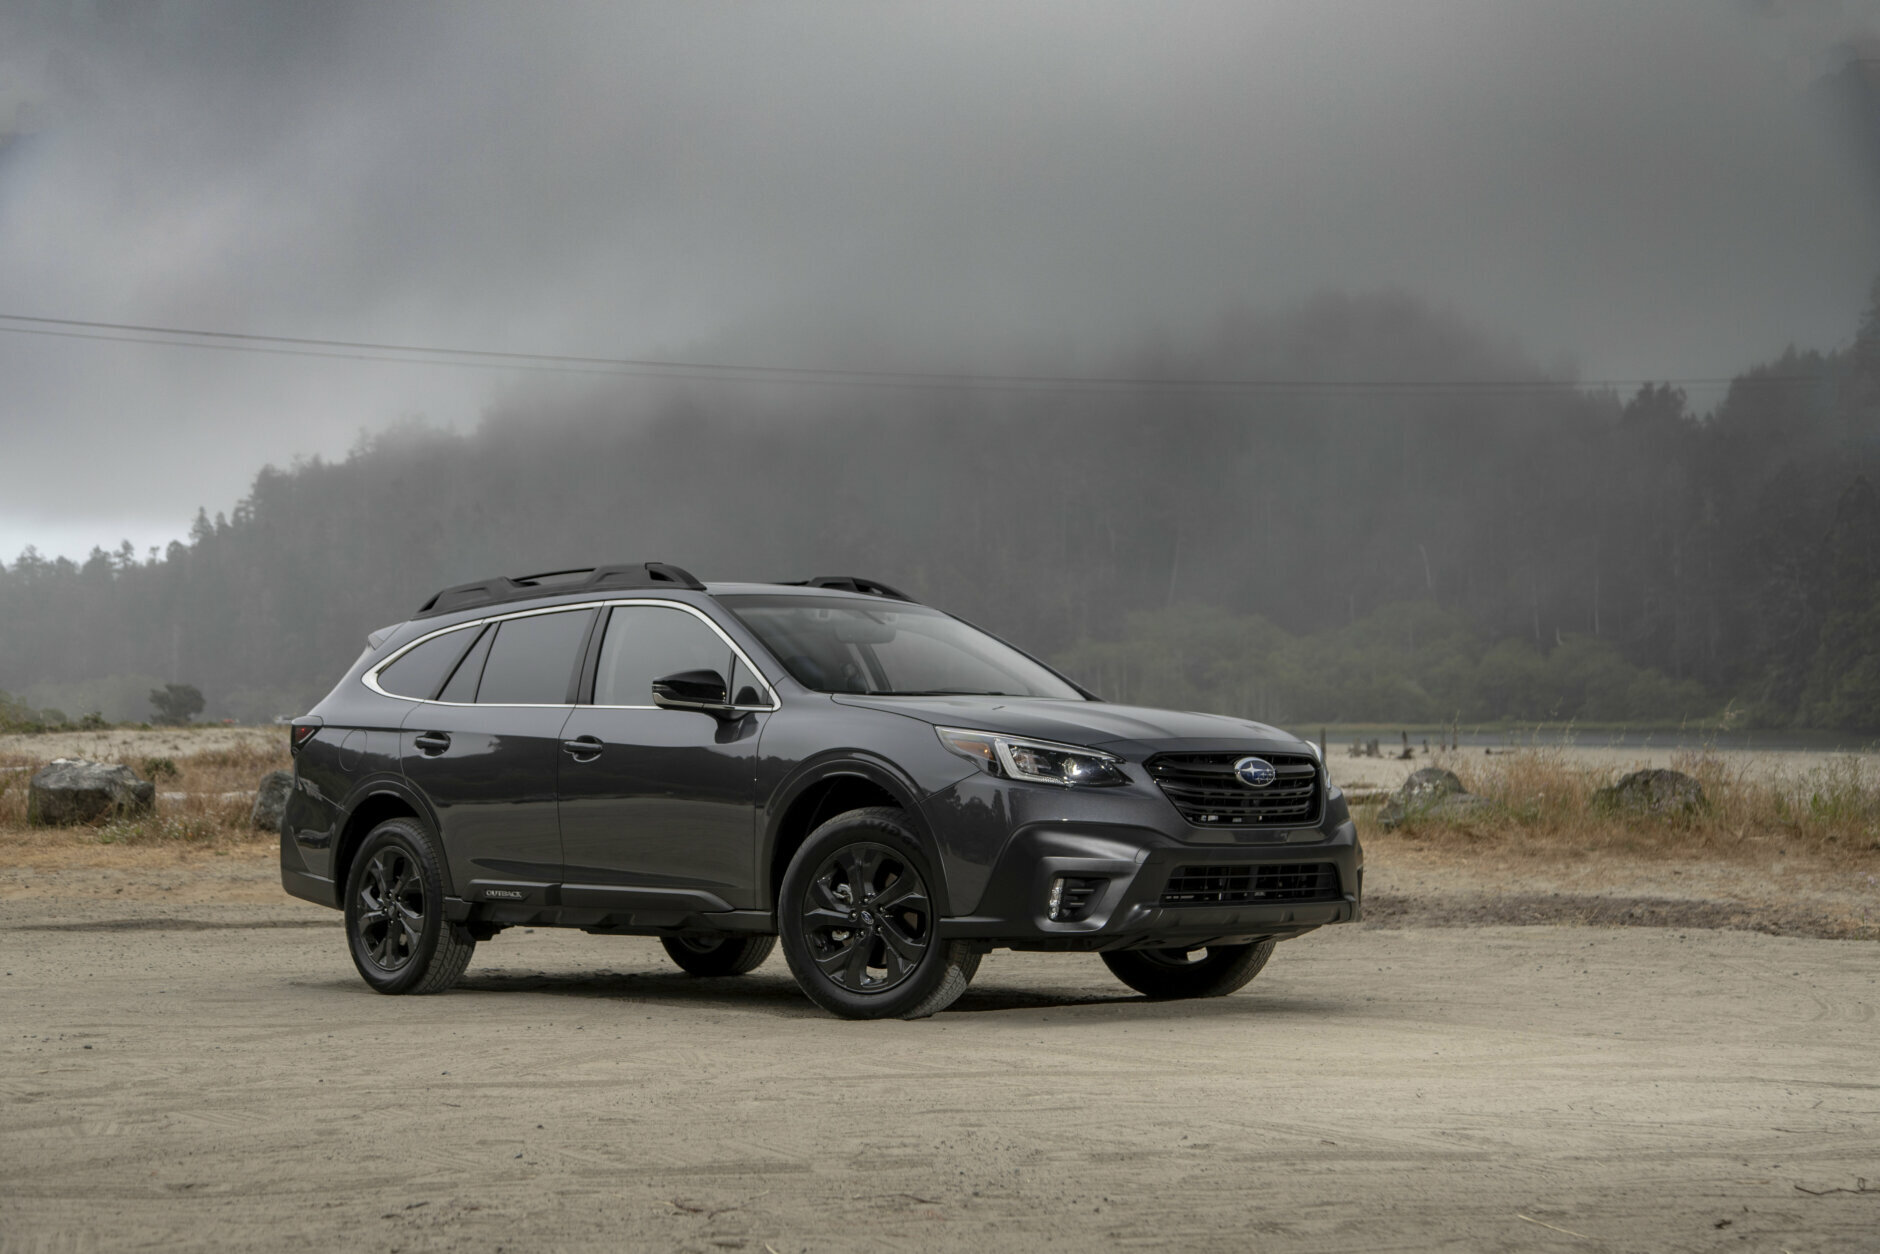 <h3><strong>2020 Subaru Outback</strong></h3>
<p><strong>Lease Deal: </strong>$249 per month for 36 months with $2,449 due at signing</p>
